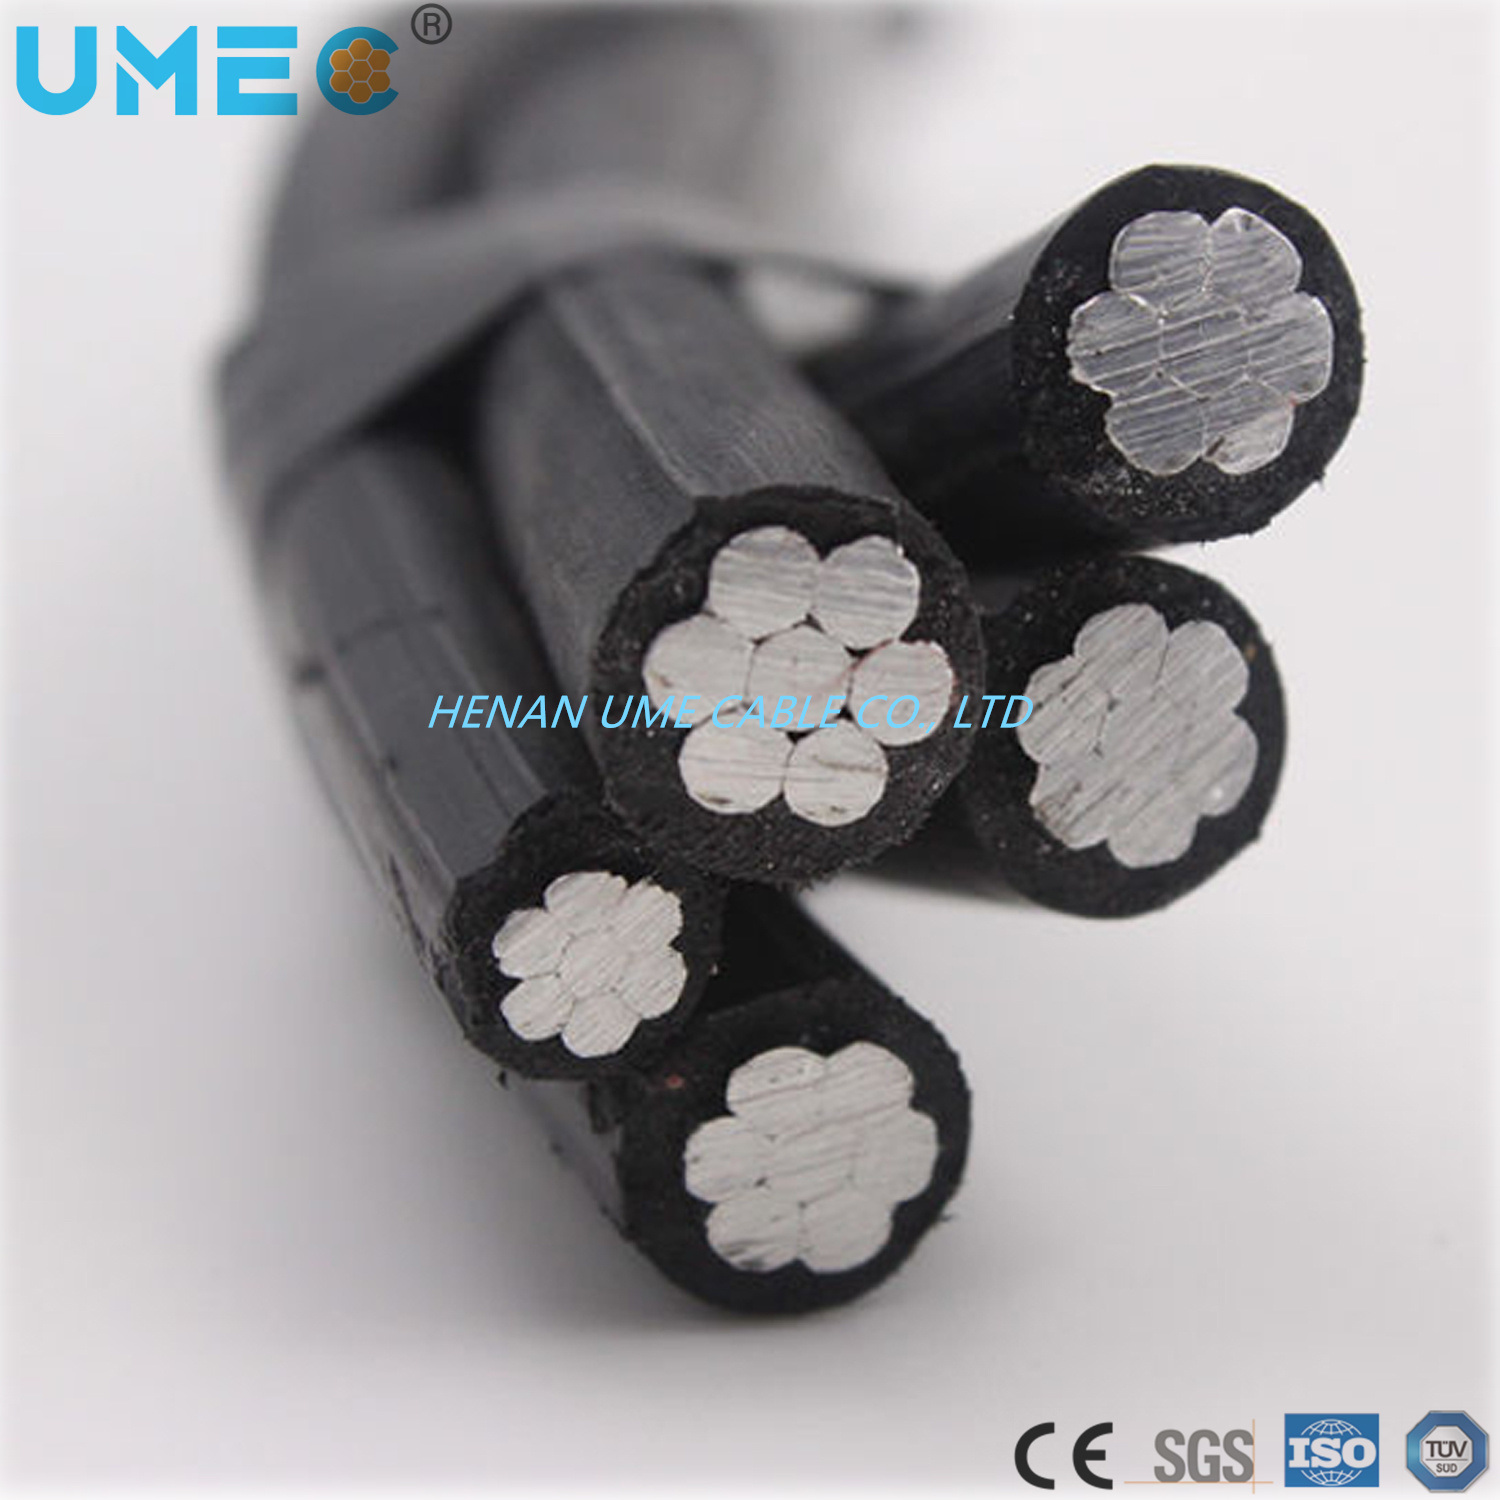 Caai Cable 2X25+ND25 Overhead XLPE Insulated Aluminum Conductor Caai Cable / Self-Supporting Cable